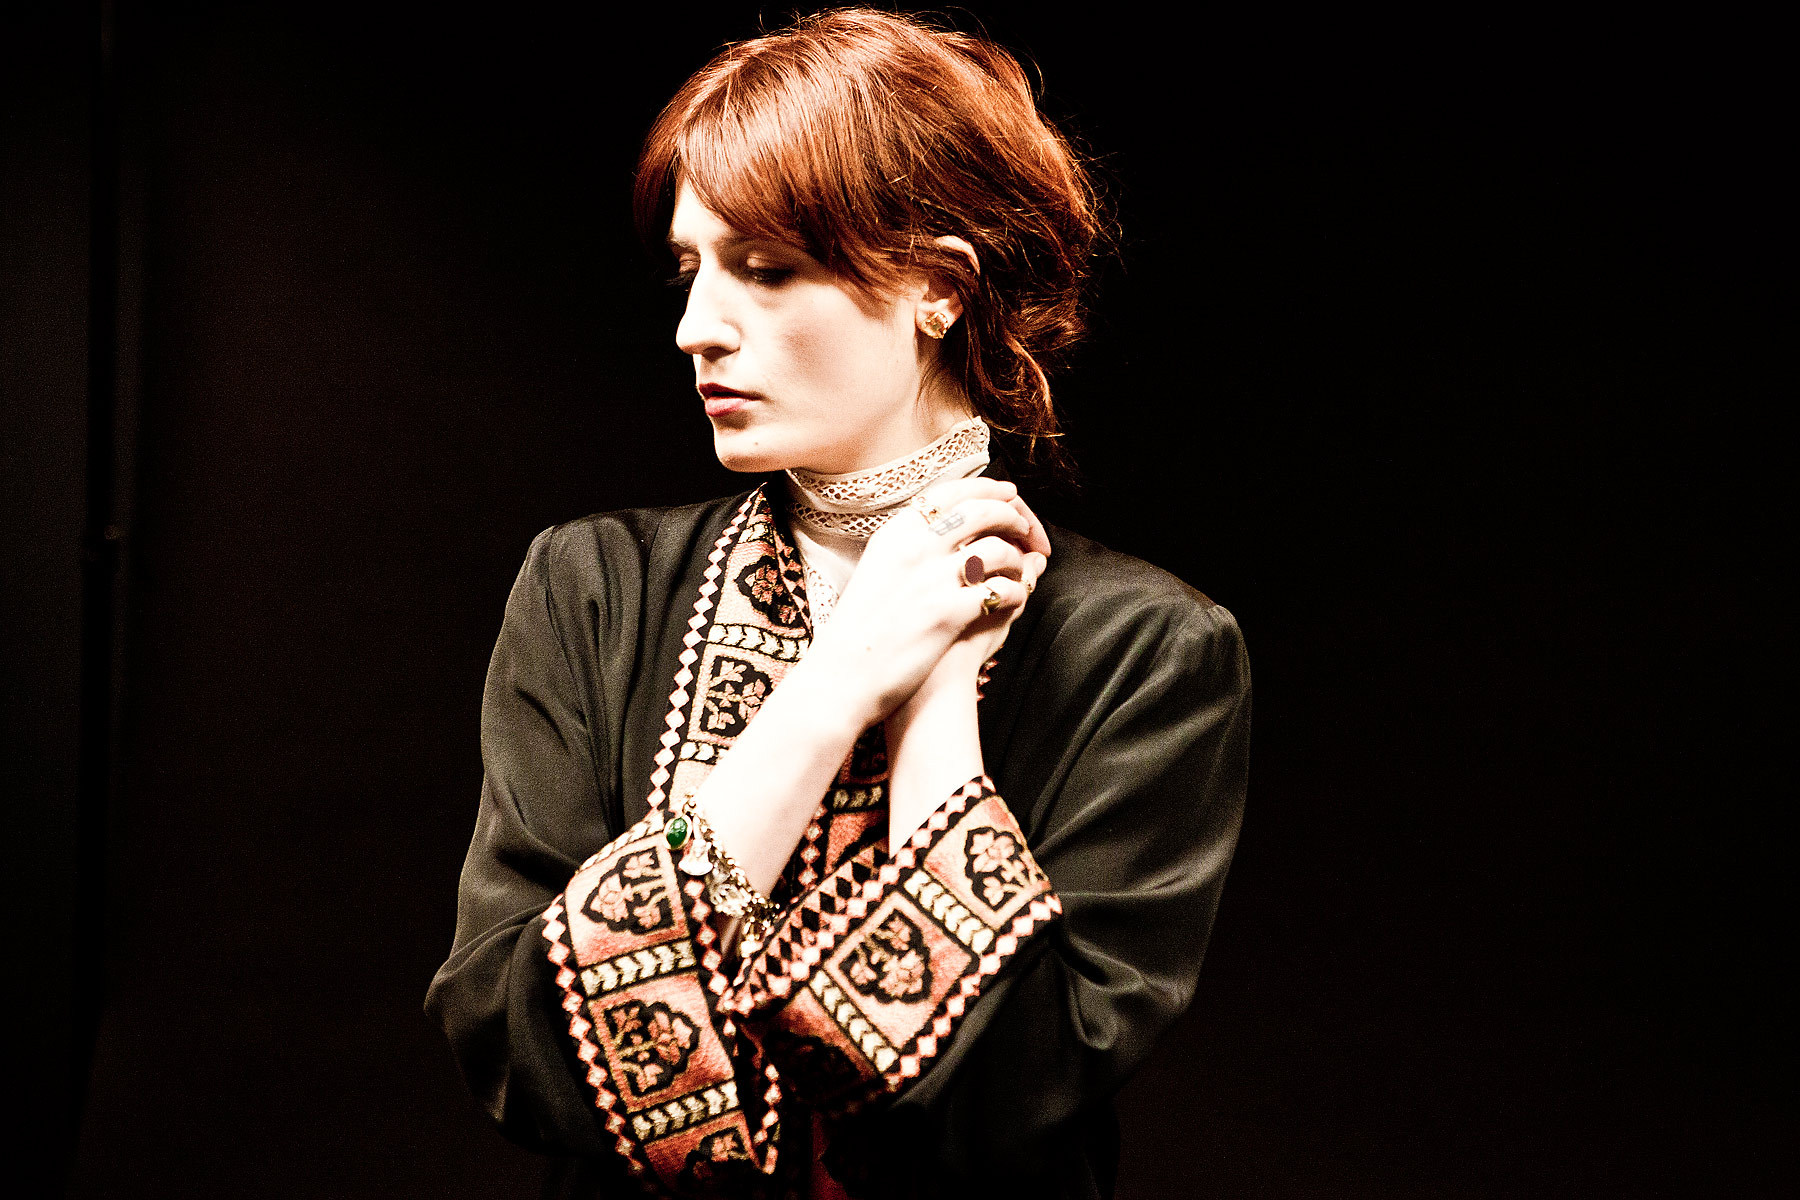 High Resolution Wallpaper | Florence And The Machine 1800x1200 px